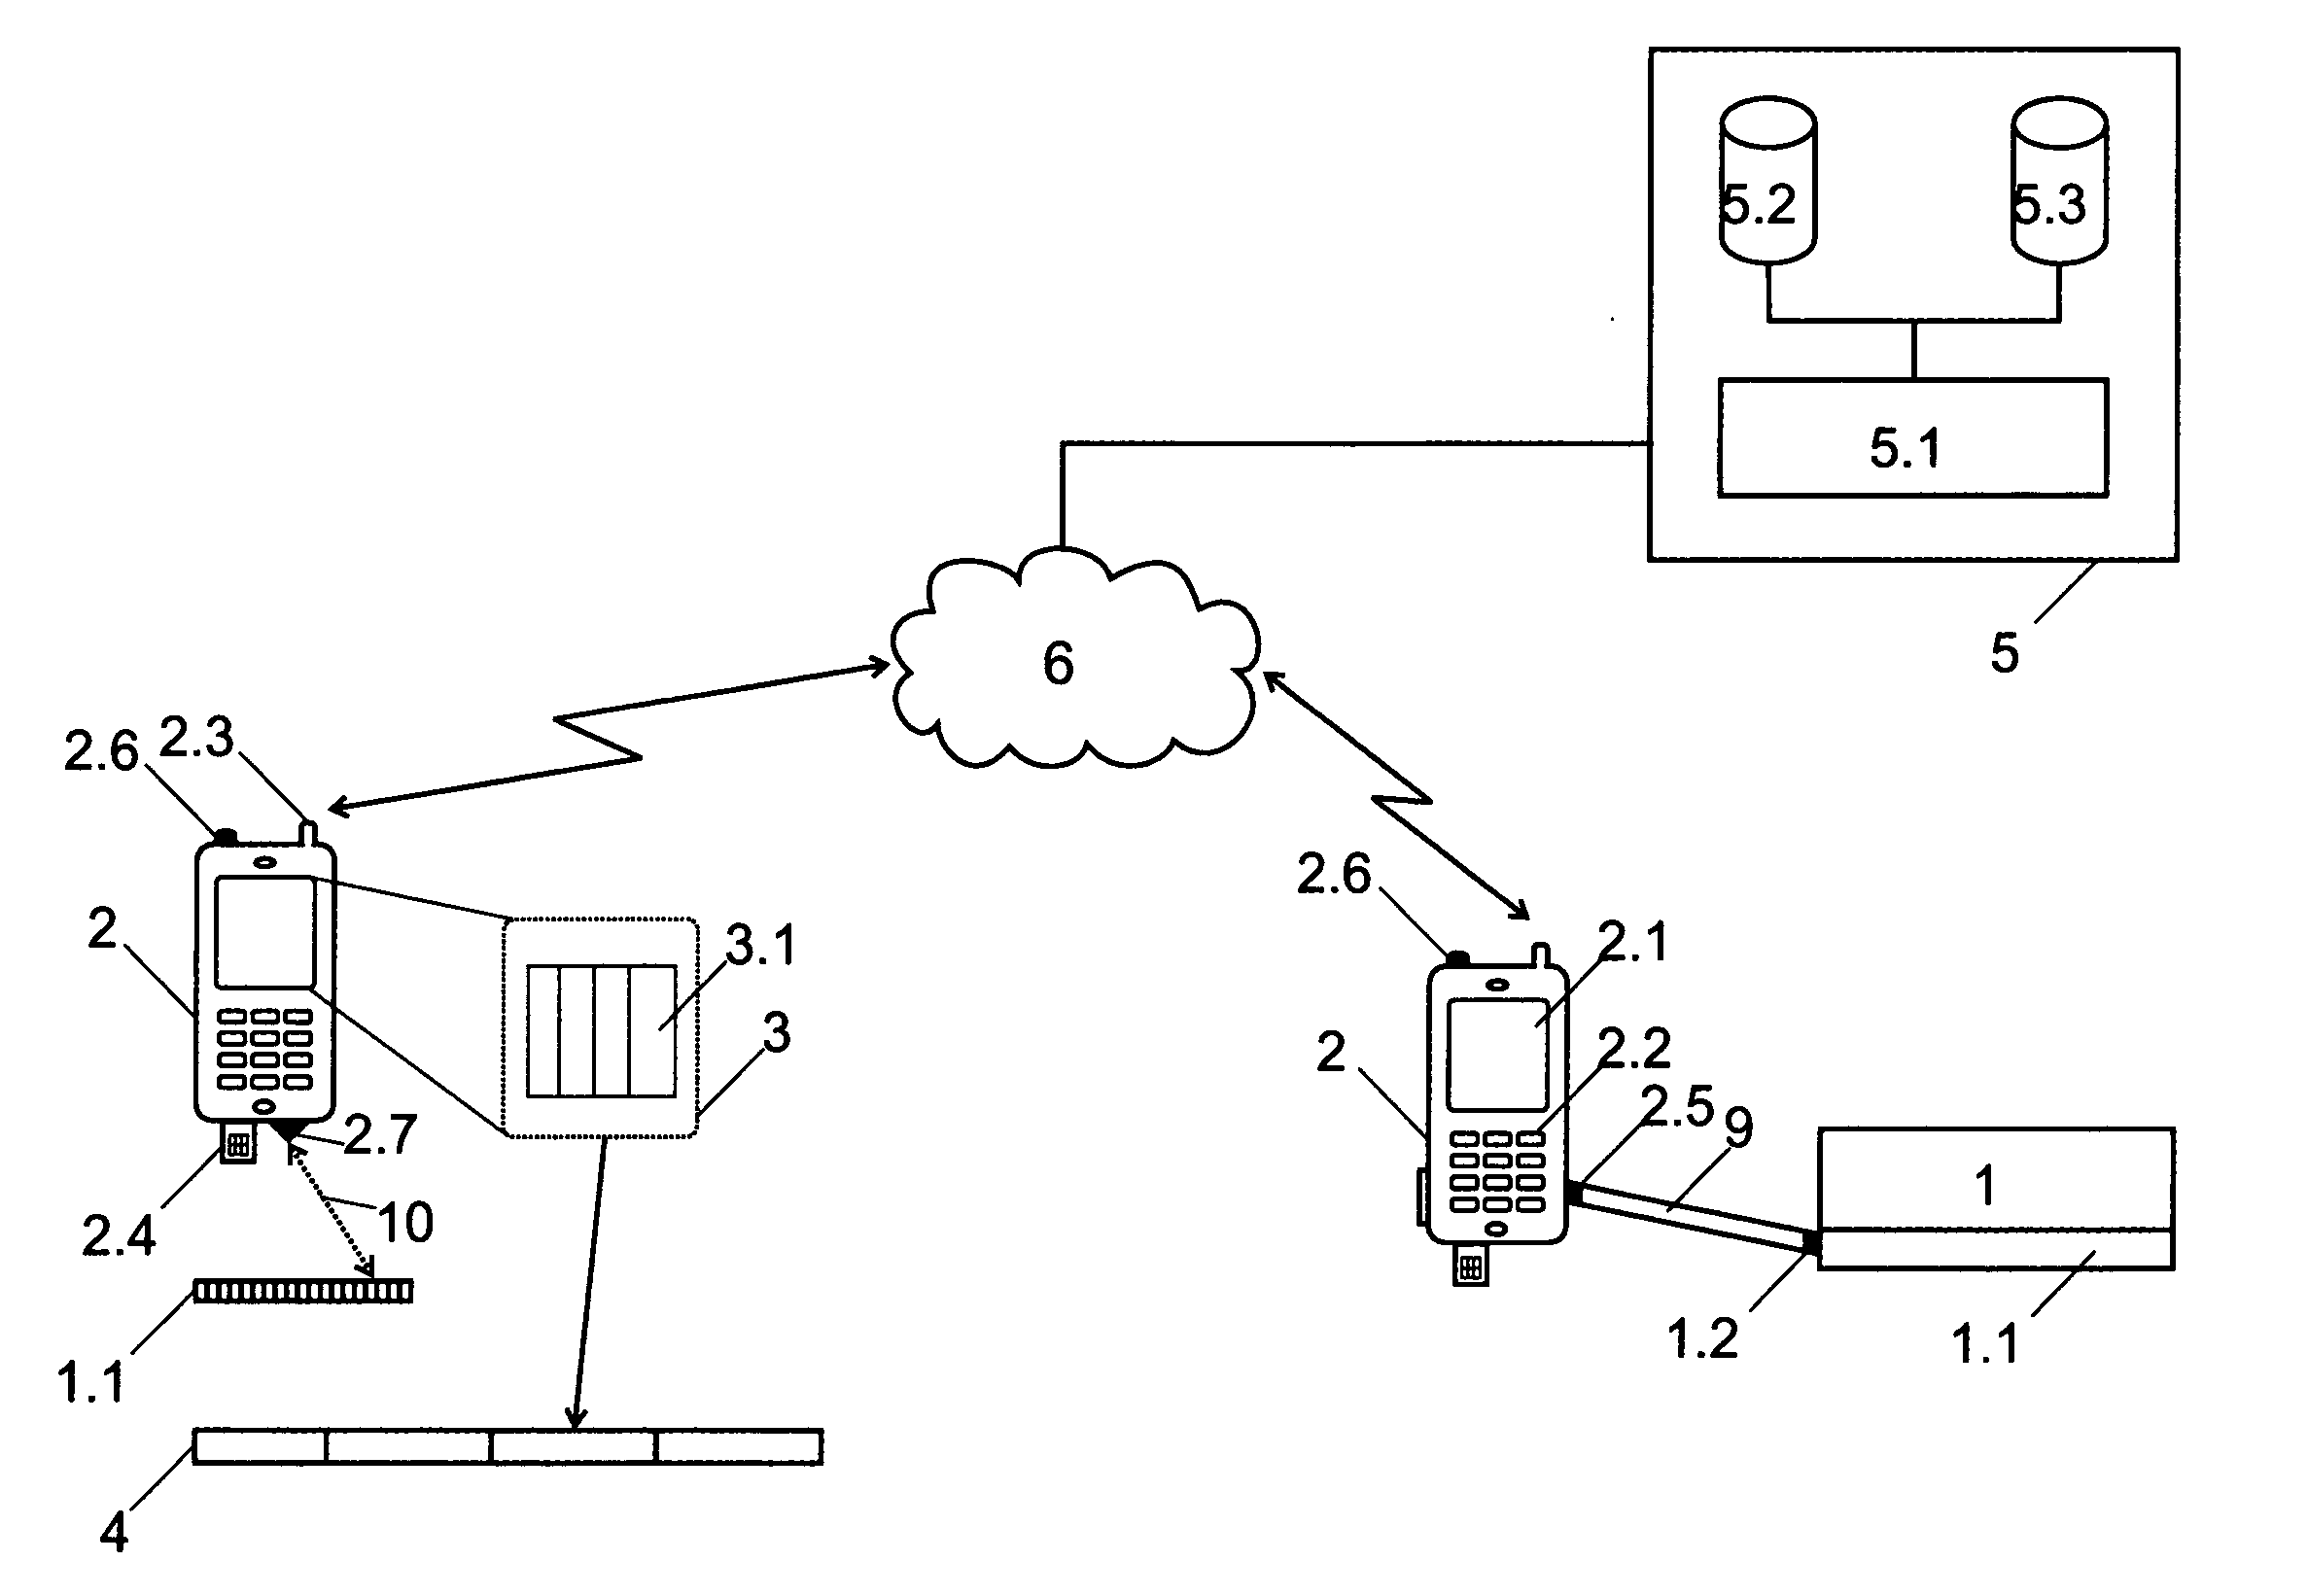 Method for directing a user of a mobile device from a current location to a product